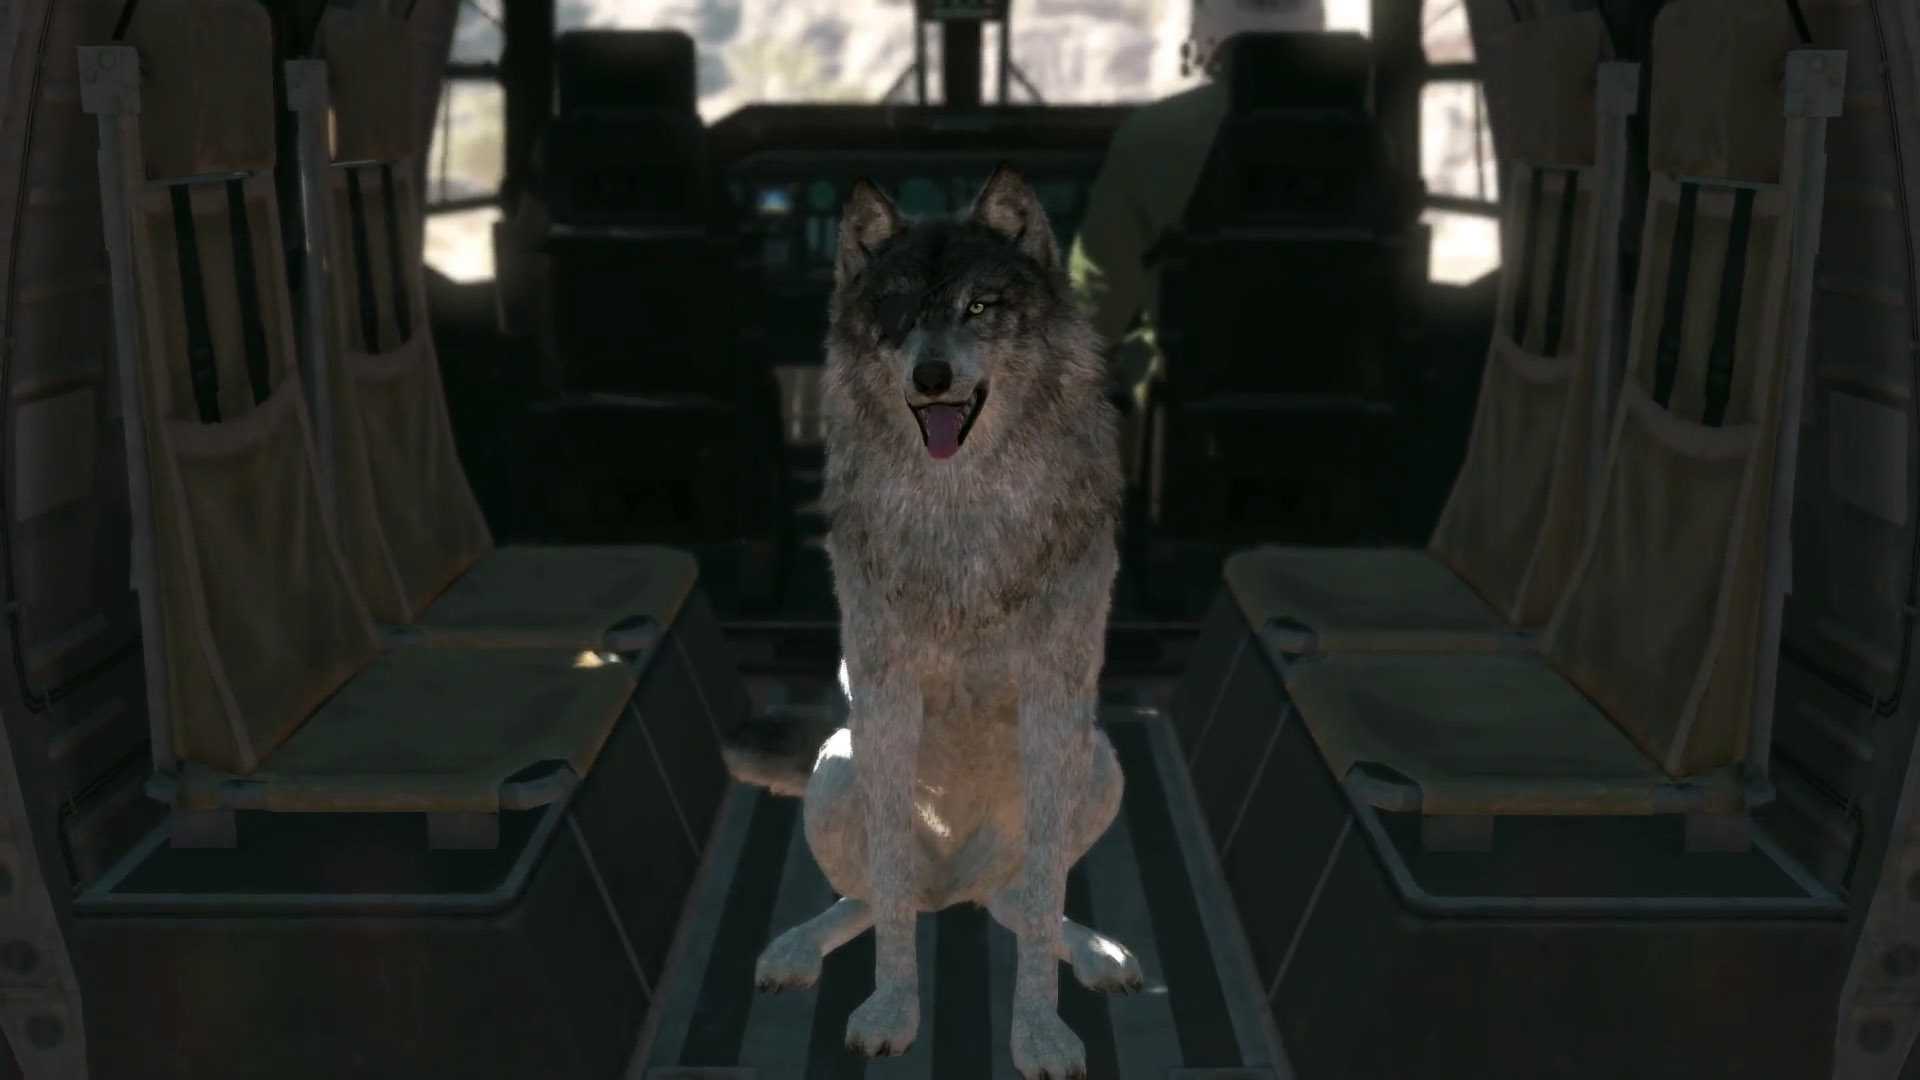 Mgs terminal portal. Metal Gear Solid 5: the Phantom Pain Dog. DD Metal Gear Solid 5. D-Dog MGS 5. Metal Gear Solid 5 собака.